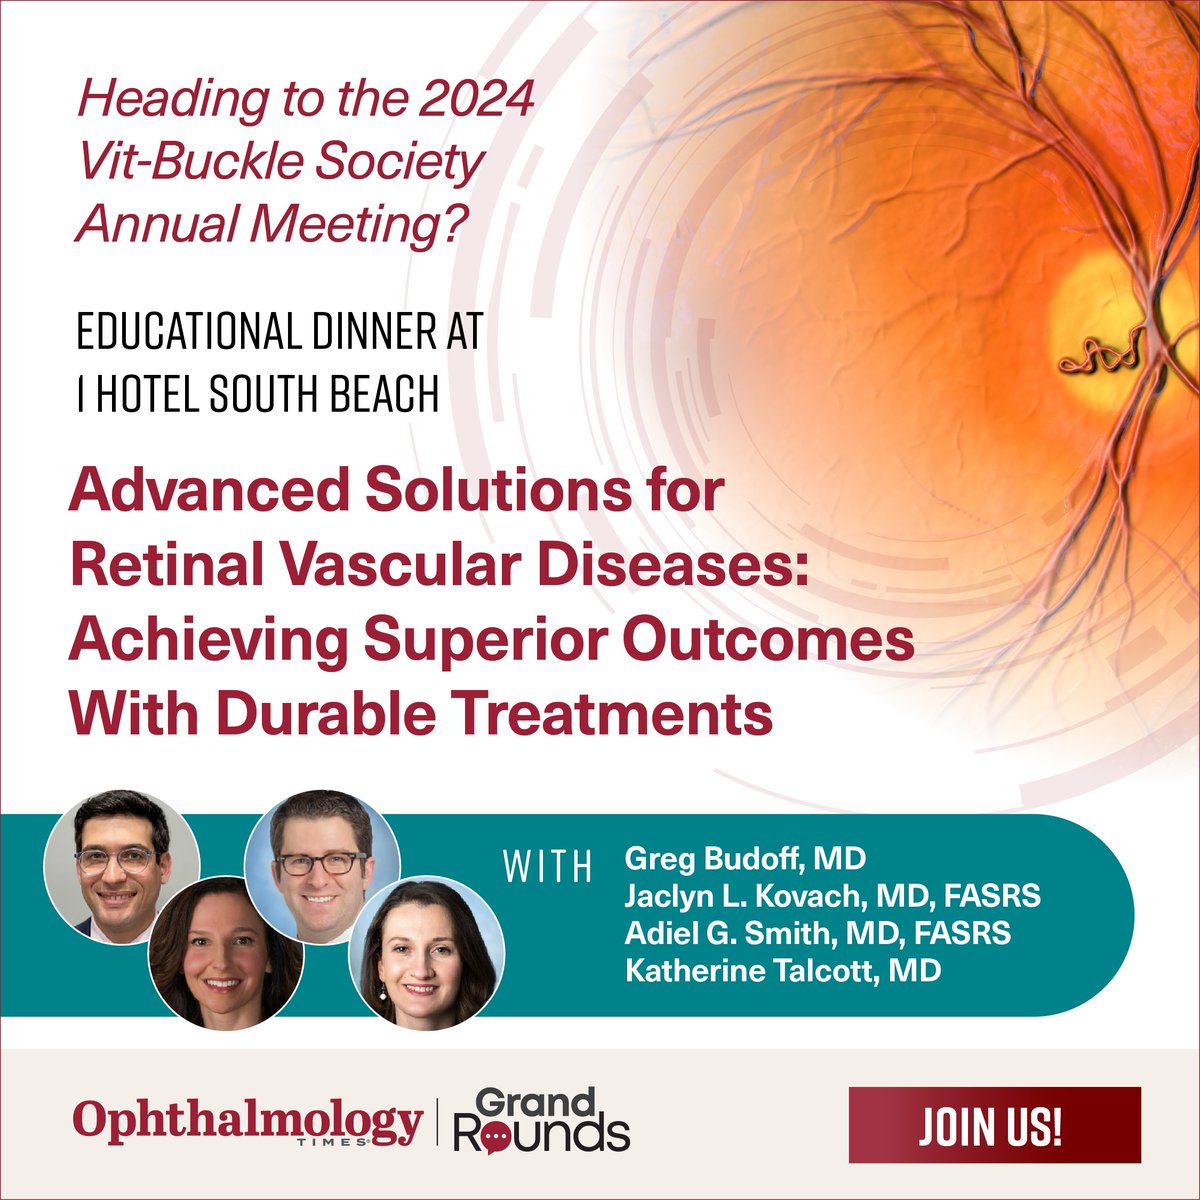 Excited for #VBS2024? Dive into the future of retinal vascular disease treatment with industry leaders at our Grand Rounds event. Learn how enhanced treatment durability  for patients with neovascular AMD, DME, or RVO. 
RSVP or learn more here! ow.ly/6o4L50QUnkq